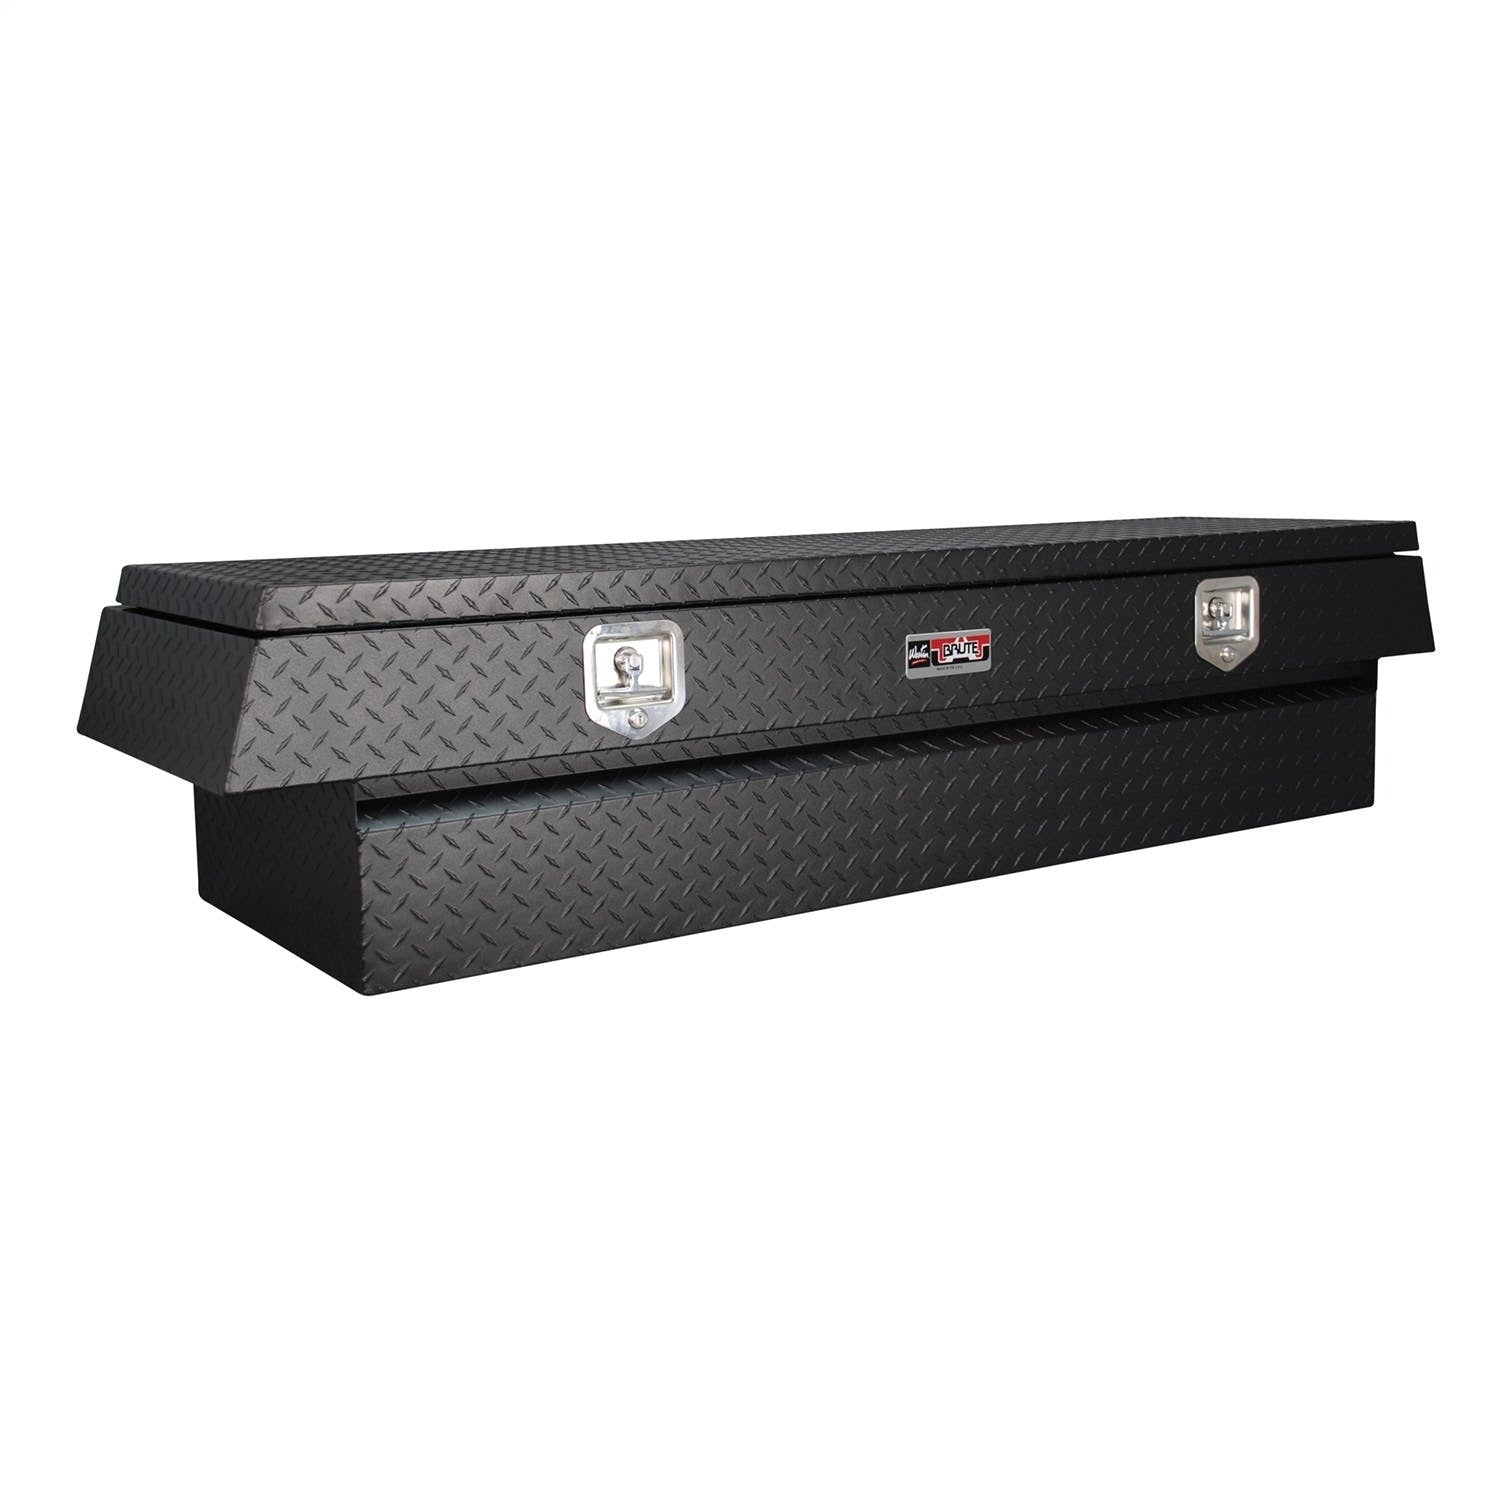 Westin Automotive 80-RB664-BT Chest 60in Overall Dims: 60x20x19 In.; Base Dims: 60x16x19